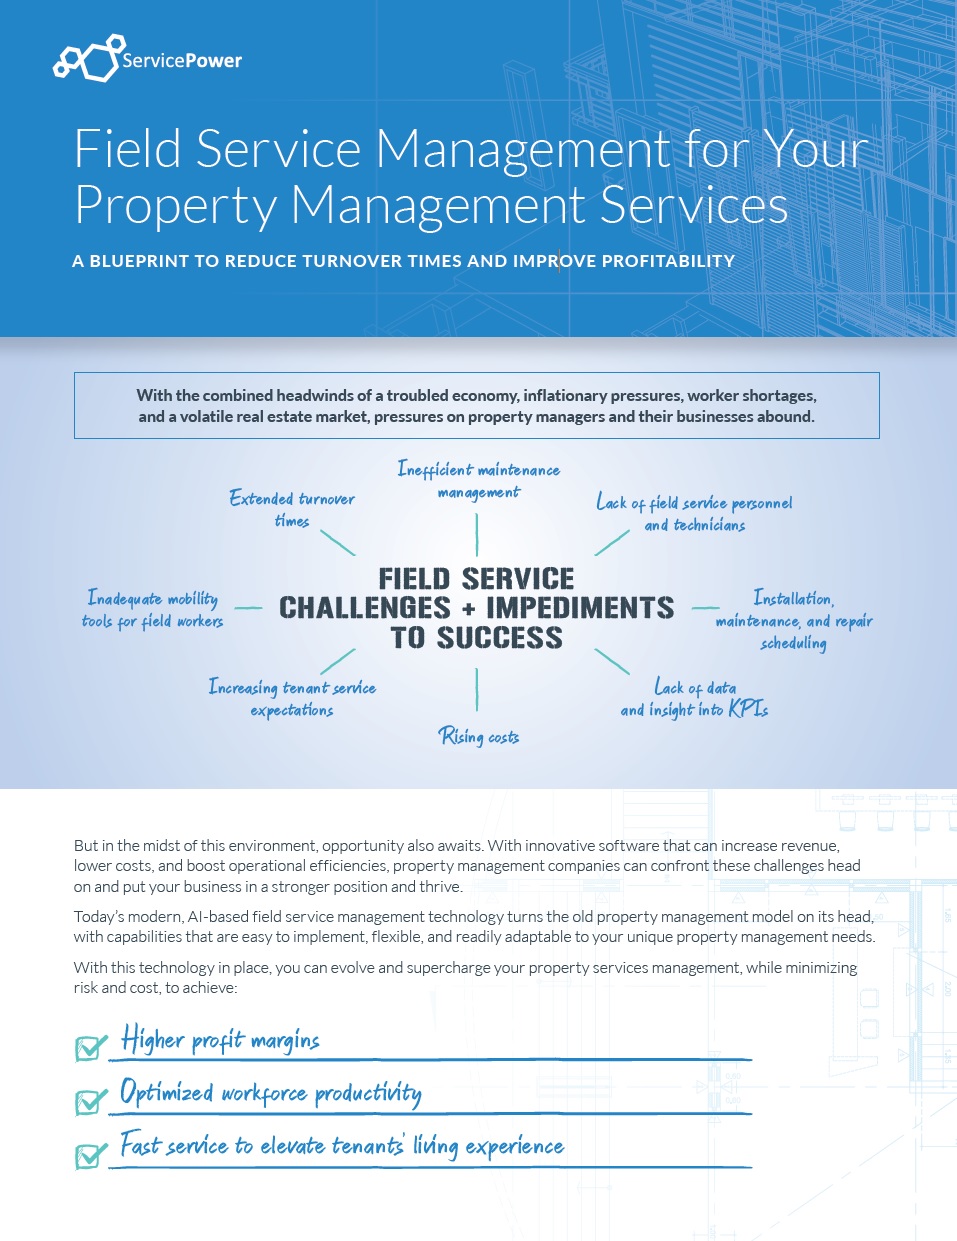 Field Service Management for Your Property Management Services